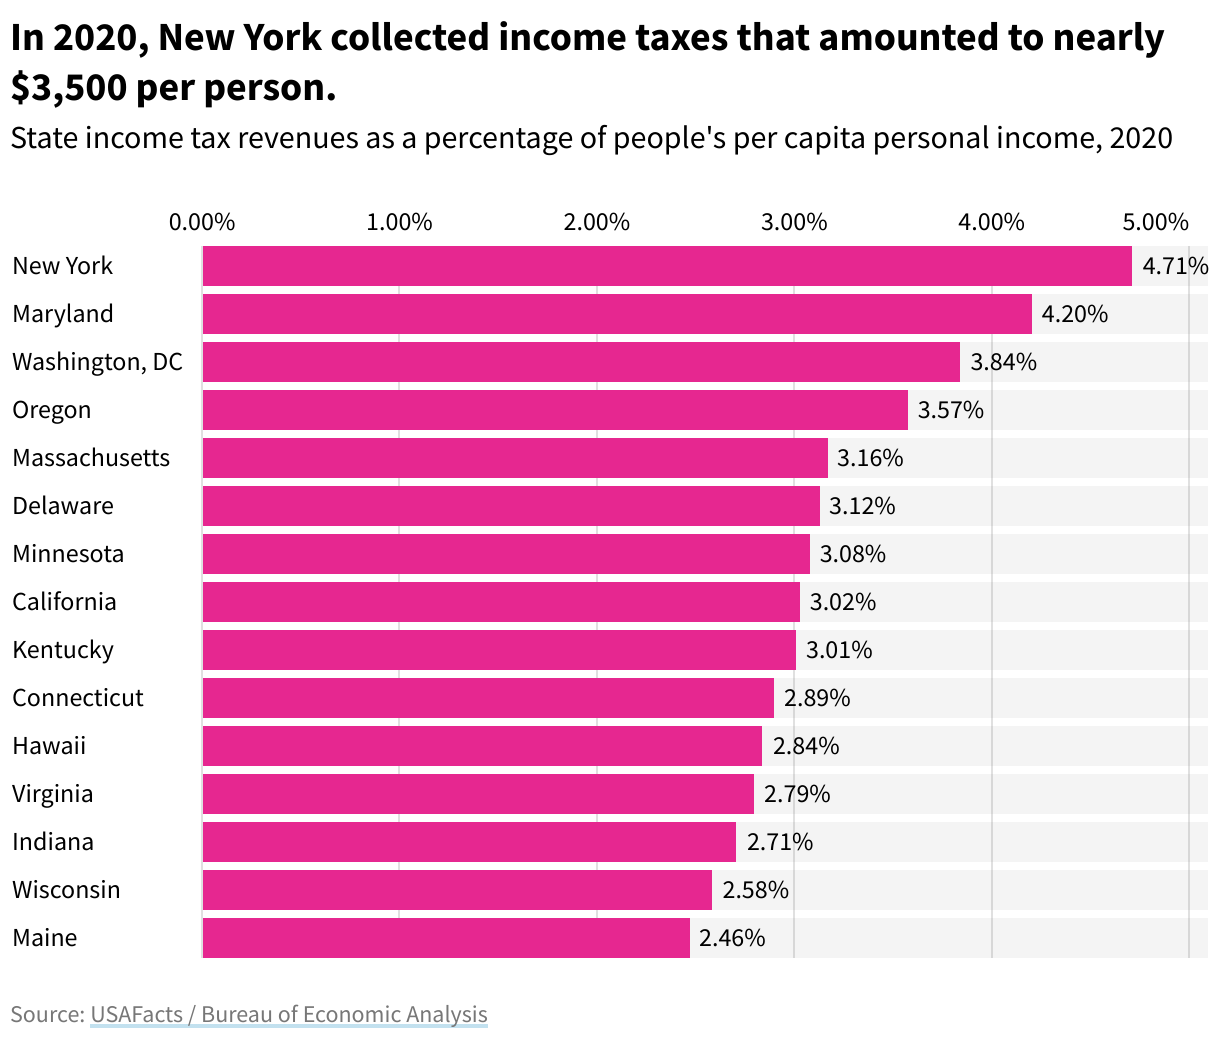 Horizontal bar chart showing state income tax revenues as a percentage of people's per capita personal income, 2020. In 2020, New York collected income taxes that amounted to nearly $3,500 per person.